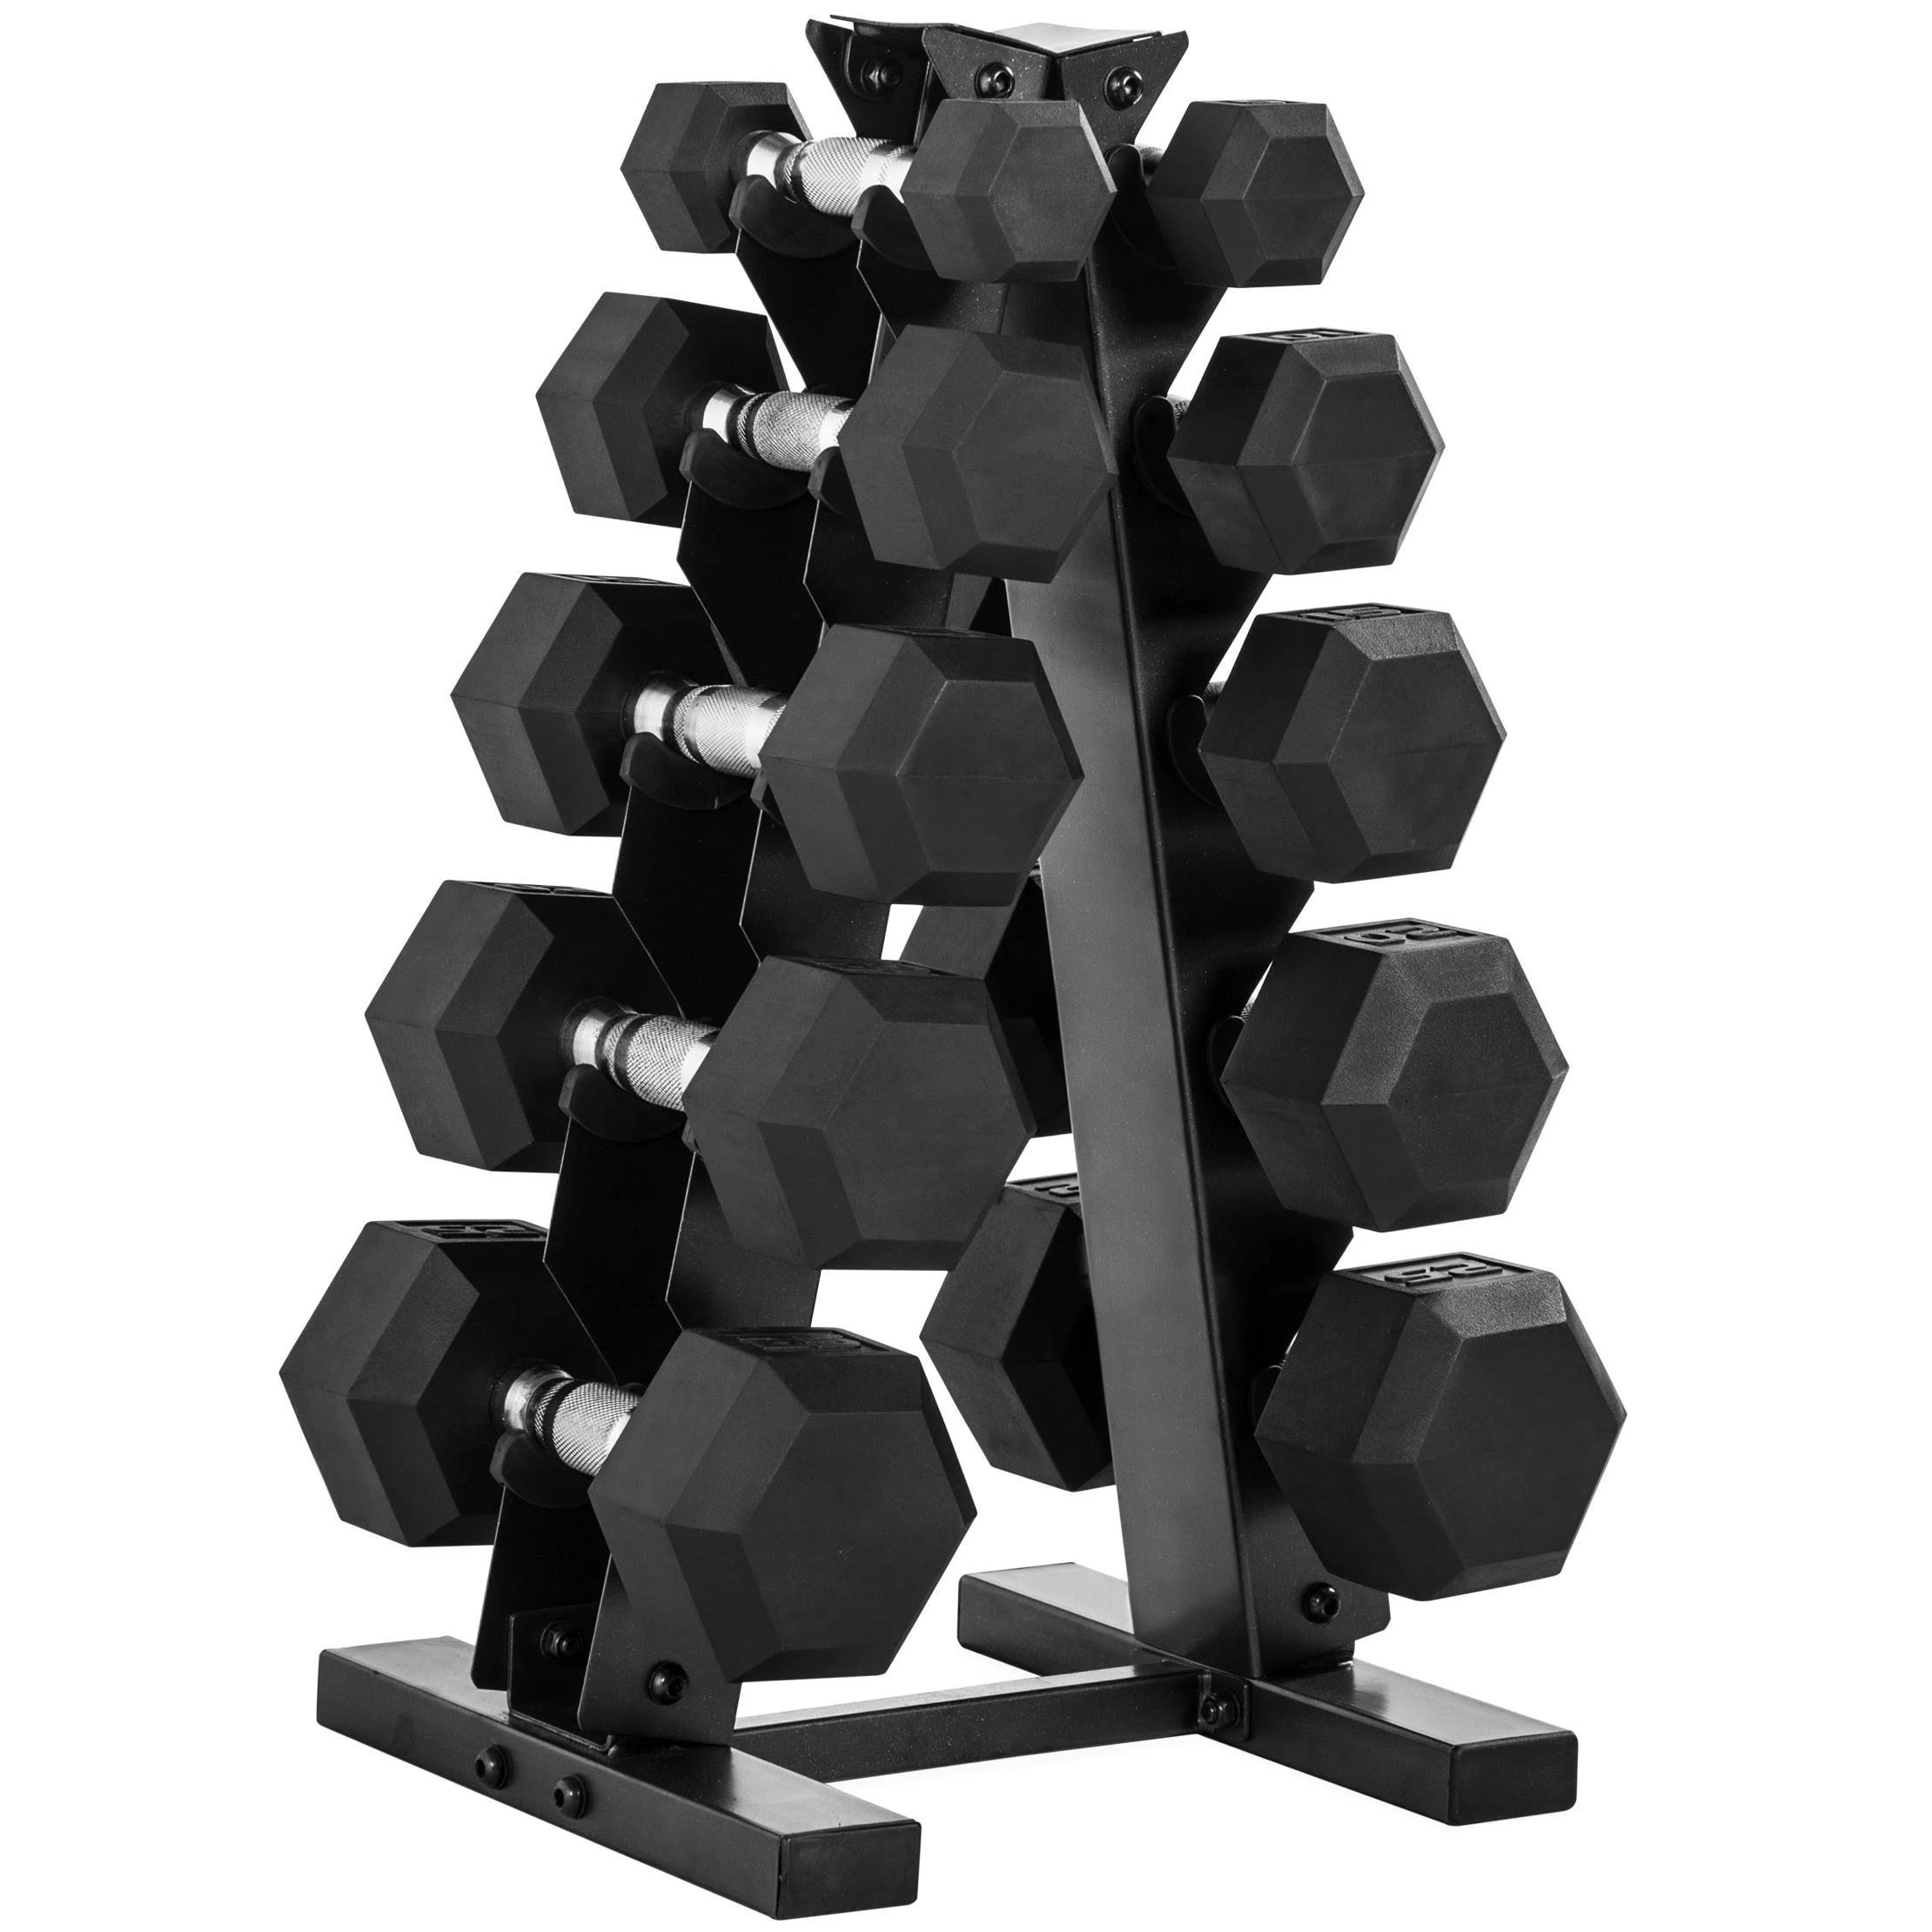 Cap Barbell 150-Pound Dumbbell Set with Rack